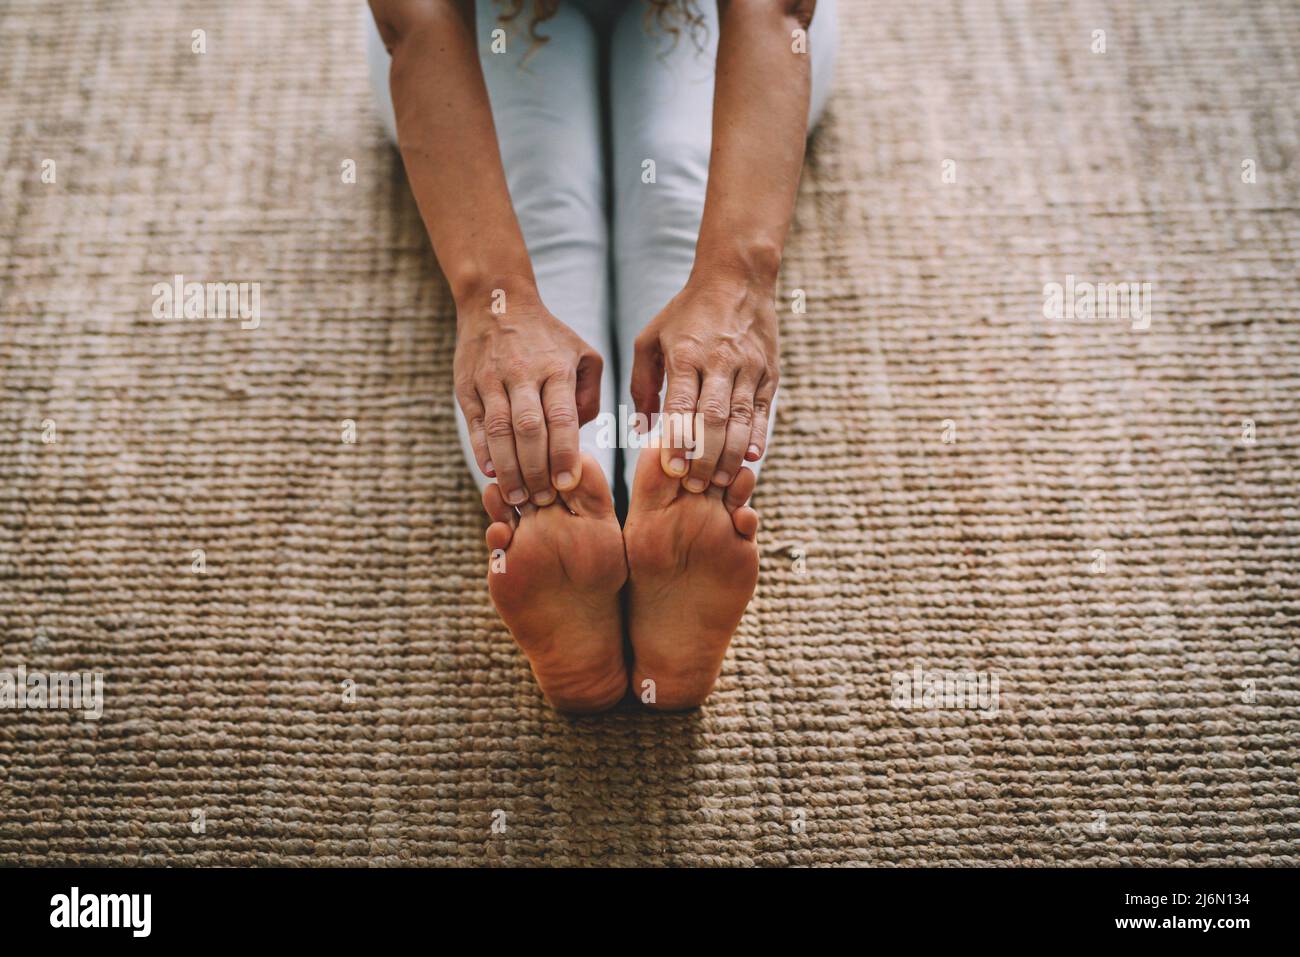 Adult mature woman and fitness healthy activity at home. Female on teh carpet touching her feet with hands for active workout active lifestyle. Stock Photo